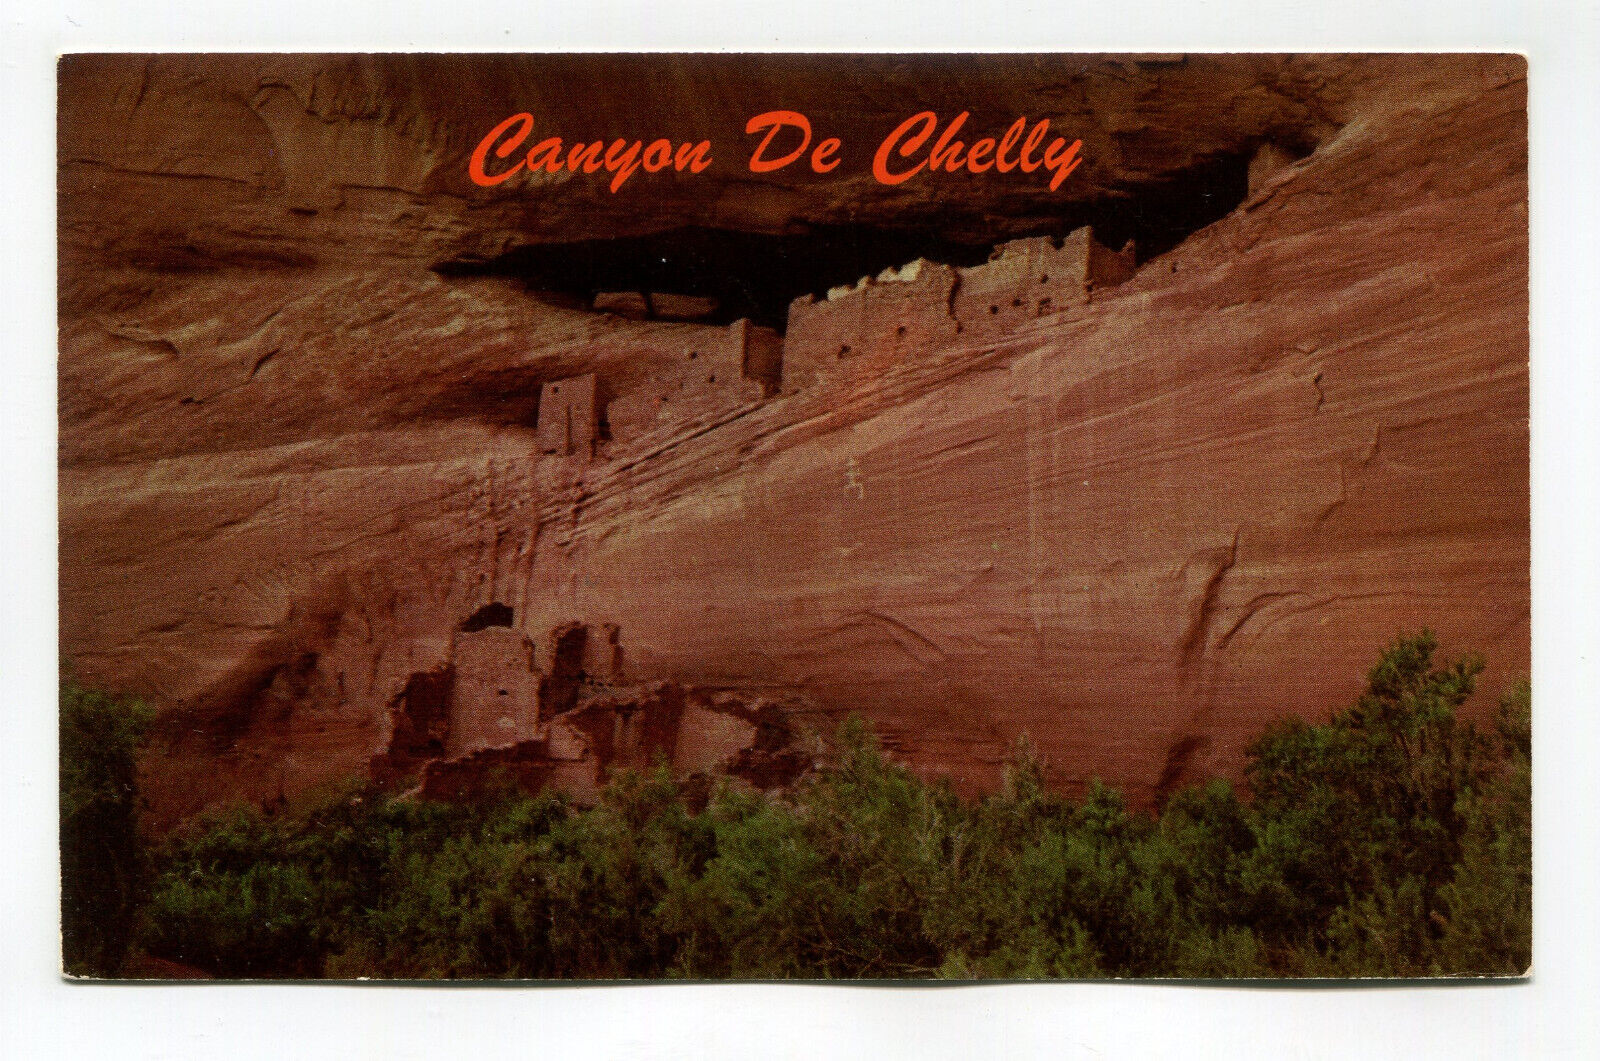 CANYON DE CHELLY CLIFF DWELLINGS NATIONAL MONUMENT